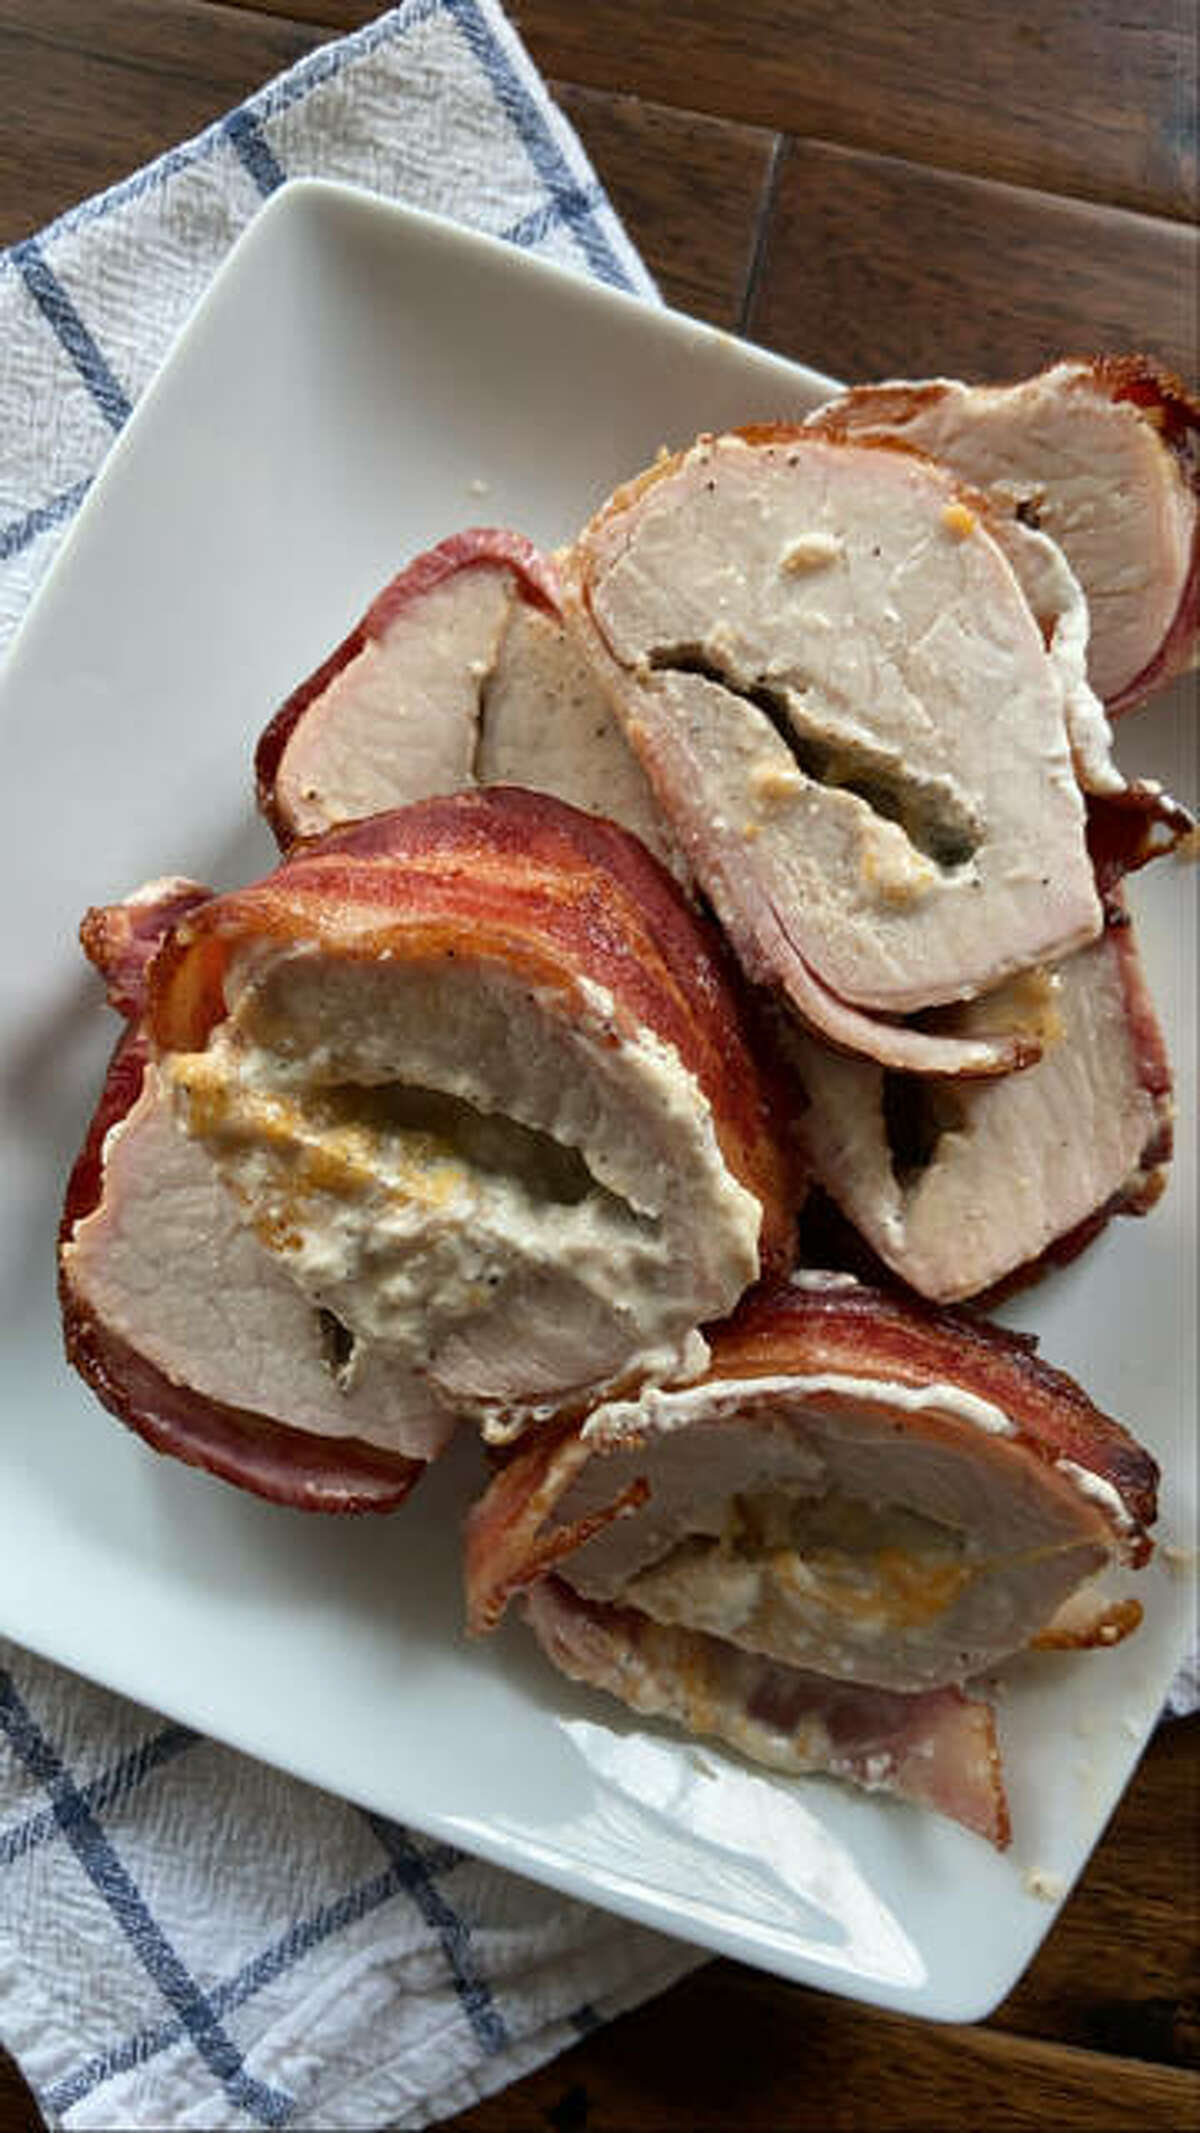 Recipe creator Rachel Tritsch says this Bacon-Wrapped Stuffed Pork Tenderloin dish is one of those dishes she makes every week for her family.